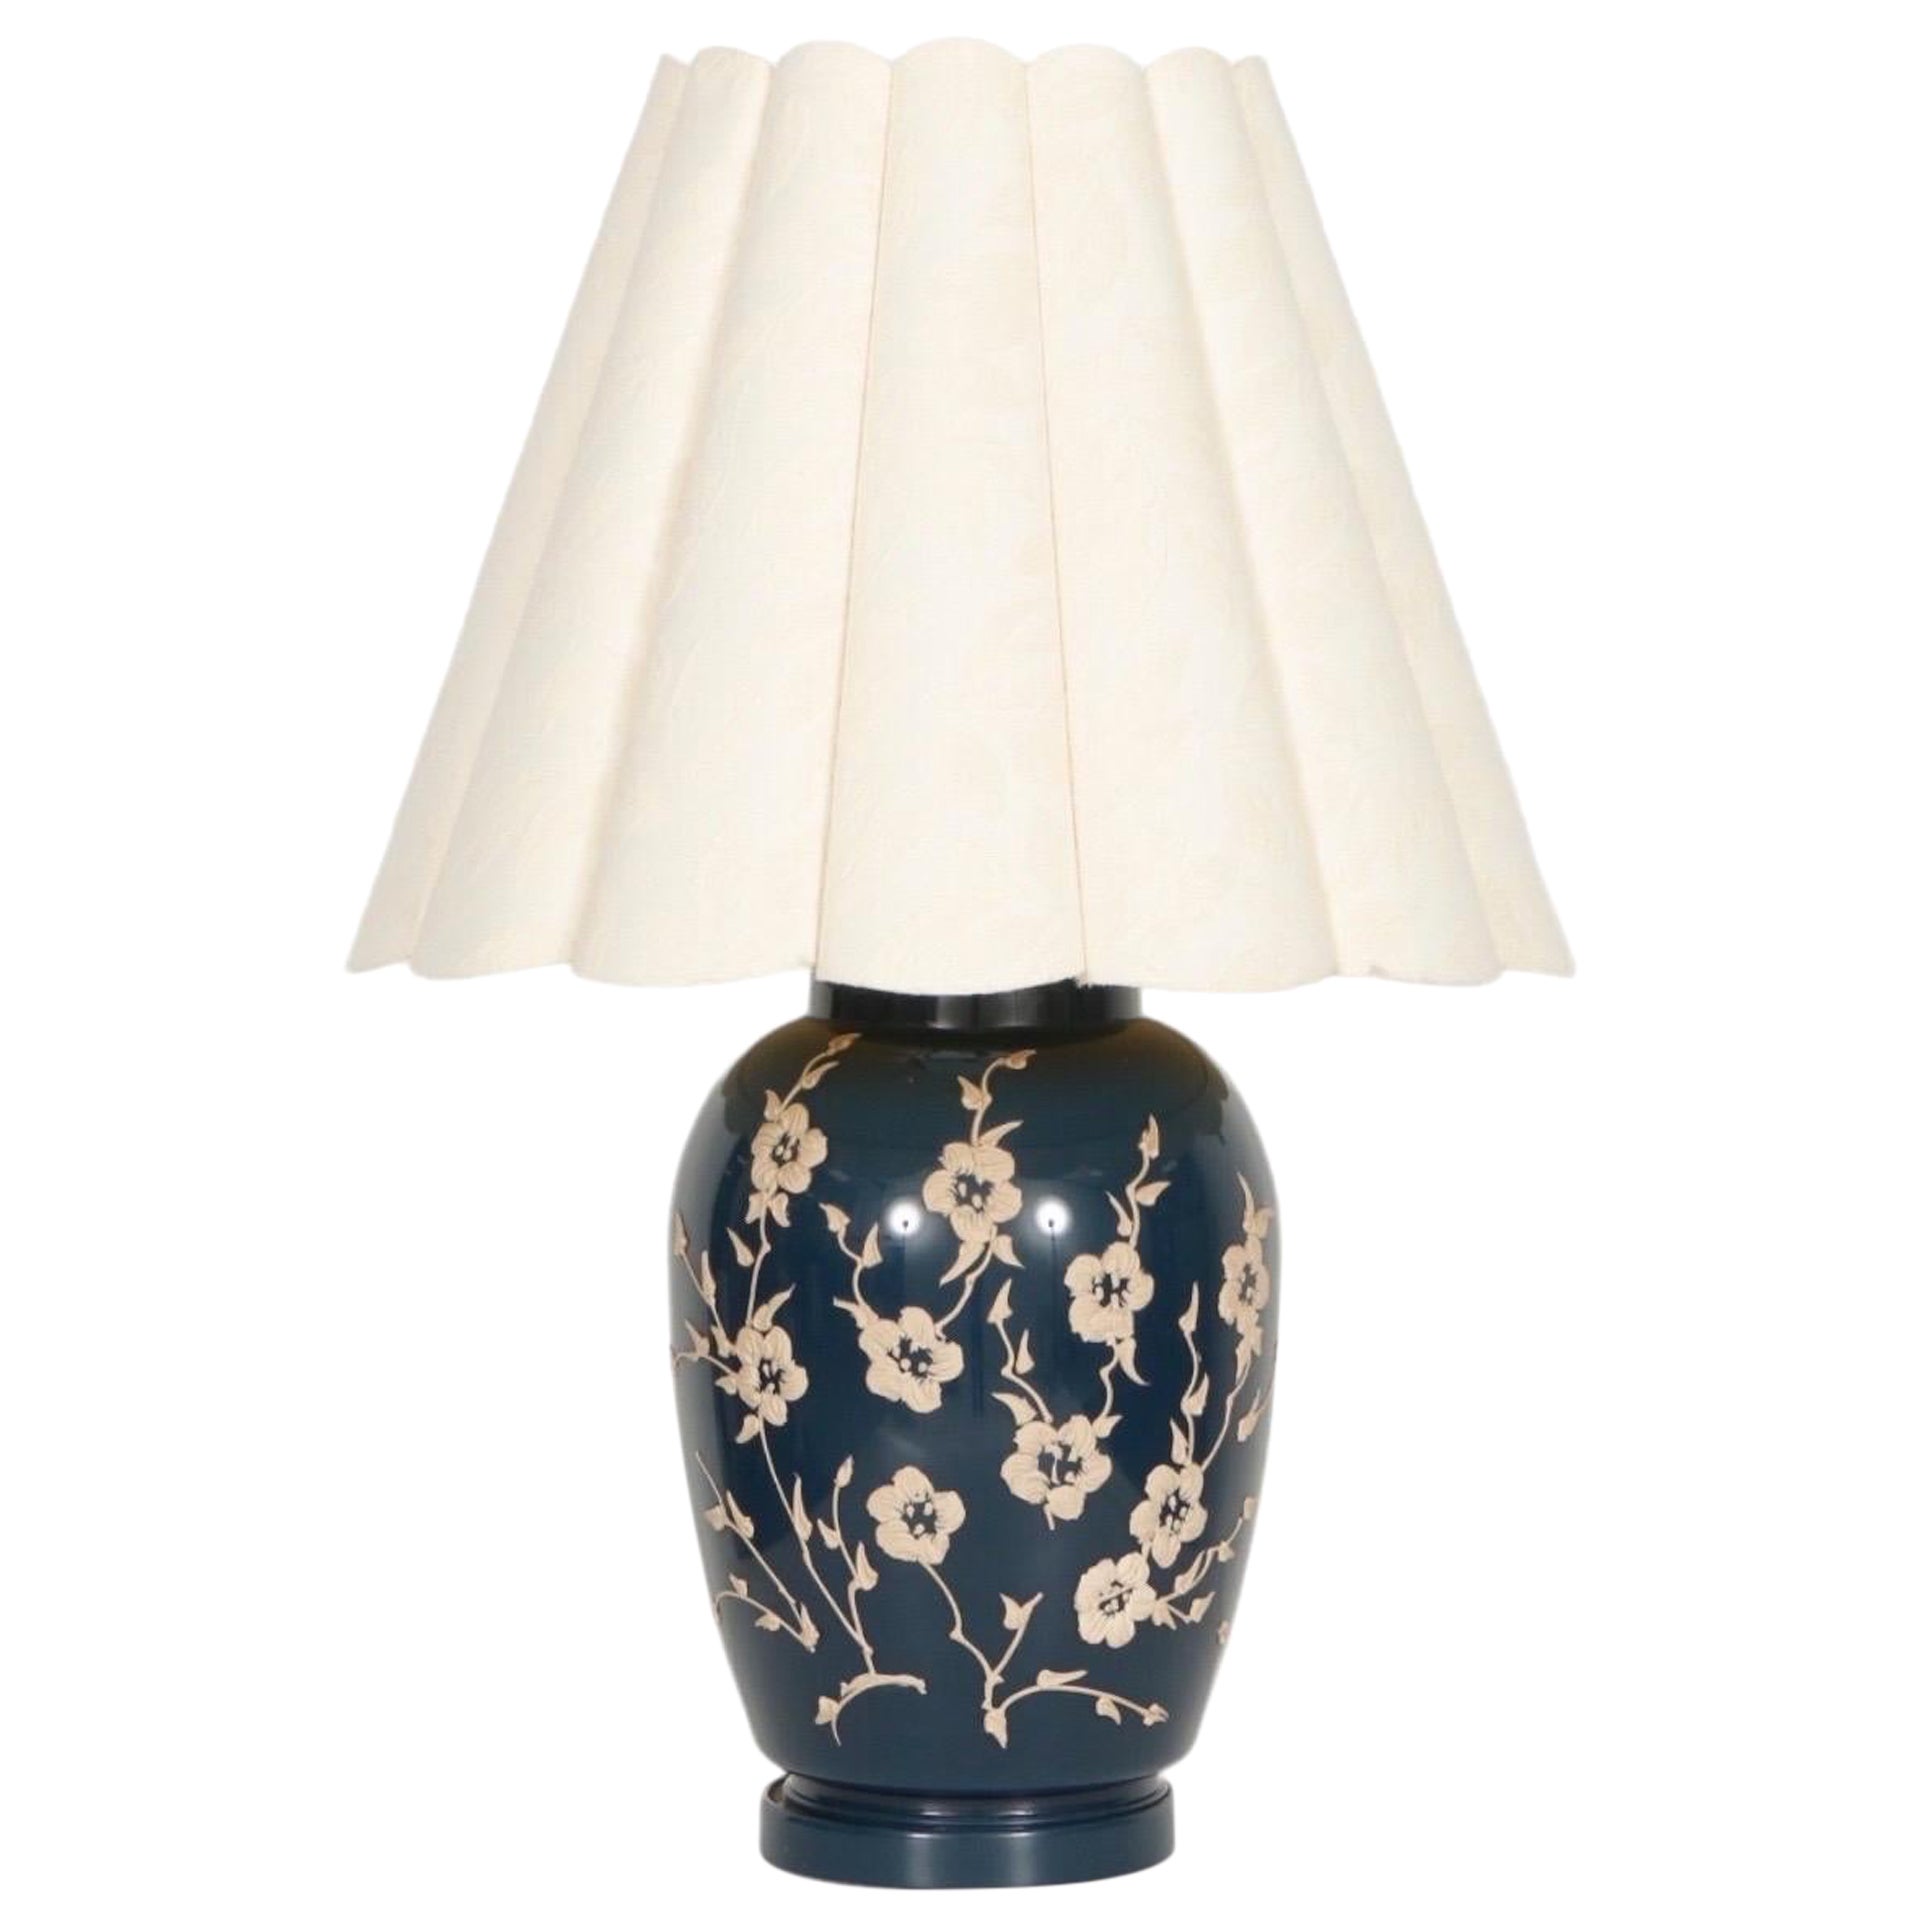 Floral Ceramic Table Lamp in Blue & Tan For Sale